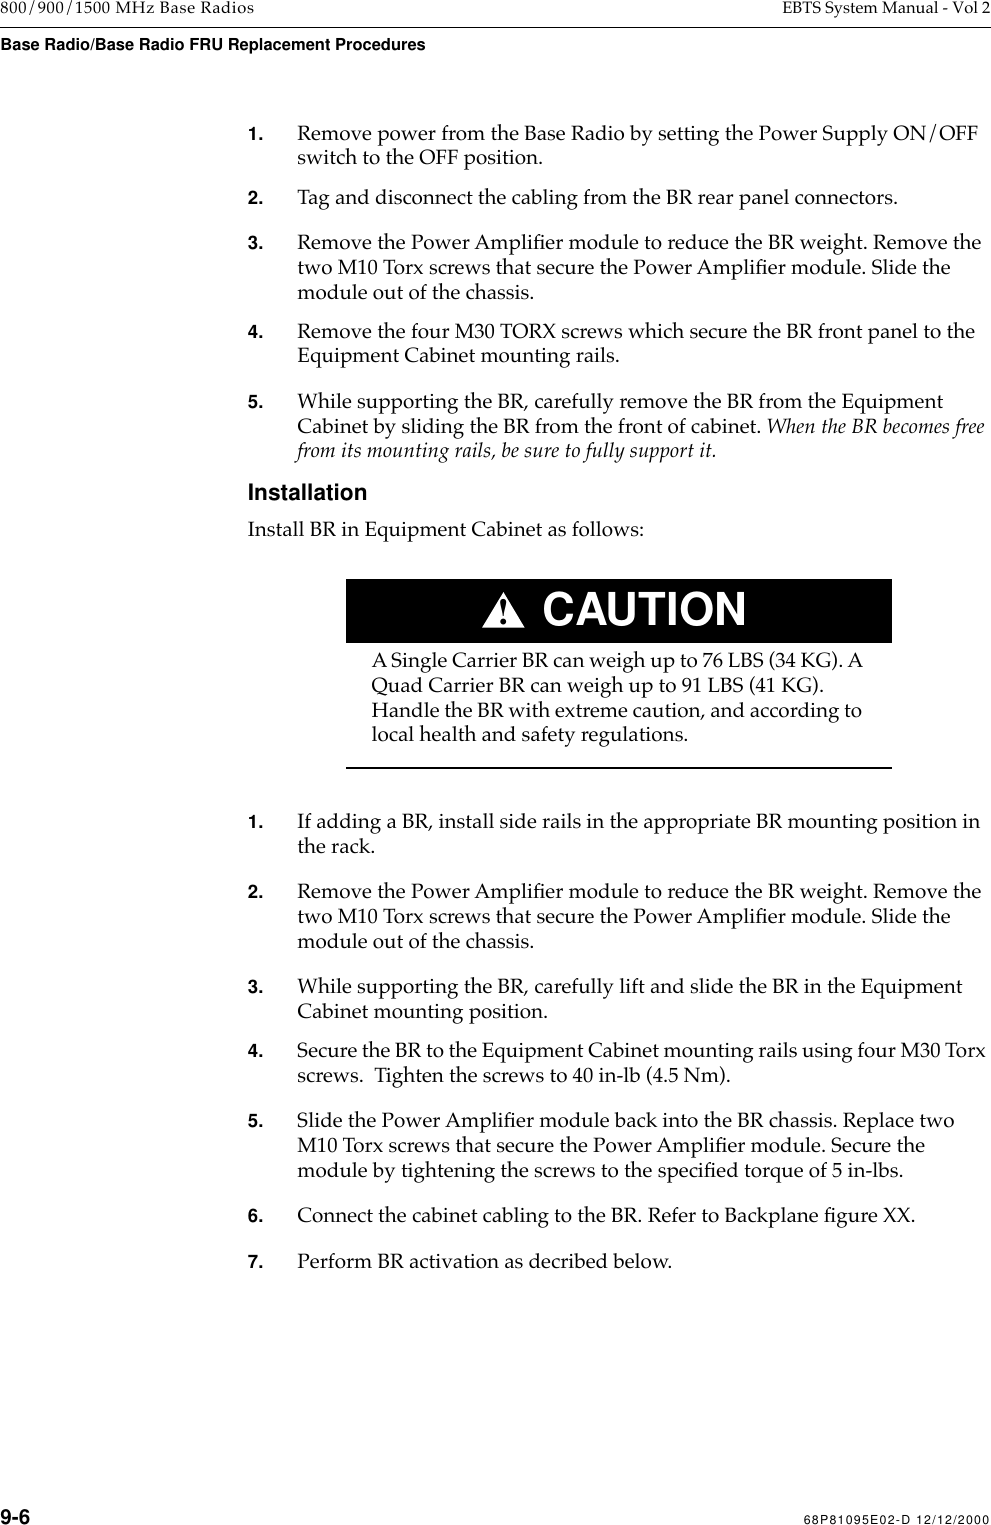  9-6 68P81095E02-D 12/12/2000 800/900/1500 MHz Base Radios EBTS System Manual - Vol 2 Base Radio/Base Radio FRU Replacement Procedures 1. Remove power from the Base Radio by setting the Power Supply ON/OFF switch to the OFF position. 2. Tag and disconnect the cabling from the BR rear panel connectors. 3. Remove the Power AmpliÞer module to reduce the BR weight. Remove the two M10 Torx screws that secure the Power AmpliÞer module. Slide the module out of the chassis. 4. Remove the four M30 TORX screws which secure the BR front panel to the Equipment Cabinet mounting rails. 5. While supporting the BR, carefully remove the BR from the Equipment Cabinet by sliding the BR from the front of cabinet.  When the BR becomes free from its mounting rails, be sure to fully support it. Installation Install BR in Equipment Cabinet as follows:CAUTION! A Single Carrier BR can weigh up to 76 LBS (34 KG). A Quad Carrier BR can weigh up to 91 LBS (41 KG). Handle the BR with extreme caution, and according to  local health and safety regulations. 1. If adding a BR, install side rails in the appropriate BR mounting position in the rack. 2. Remove the Power AmpliÞer module to reduce the BR weight. Remove the two M10 Torx screws that secure the Power AmpliÞer module. Slide the module out of the chassis. 3. While supporting the BR, carefully lift and slide the BR in the Equipment Cabinet mounting position. 4. Secure the BR to the Equipment Cabinet mounting rails using four M30 Torx screws.  Tighten the screws to 40 in-lb (4.5 Nm). 5. Slide the Power AmpliÞer module back into the BR chassis. Replace two M10 Torx screws that secure the Power AmpliÞer module. Secure the module by tightening the screws to the speciÞed torque of 5 in-lbs. 6. Connect the cabinet cabling to the BR. Refer to Backplane Þgure XX. 7. Perform BR activation as decribed below.